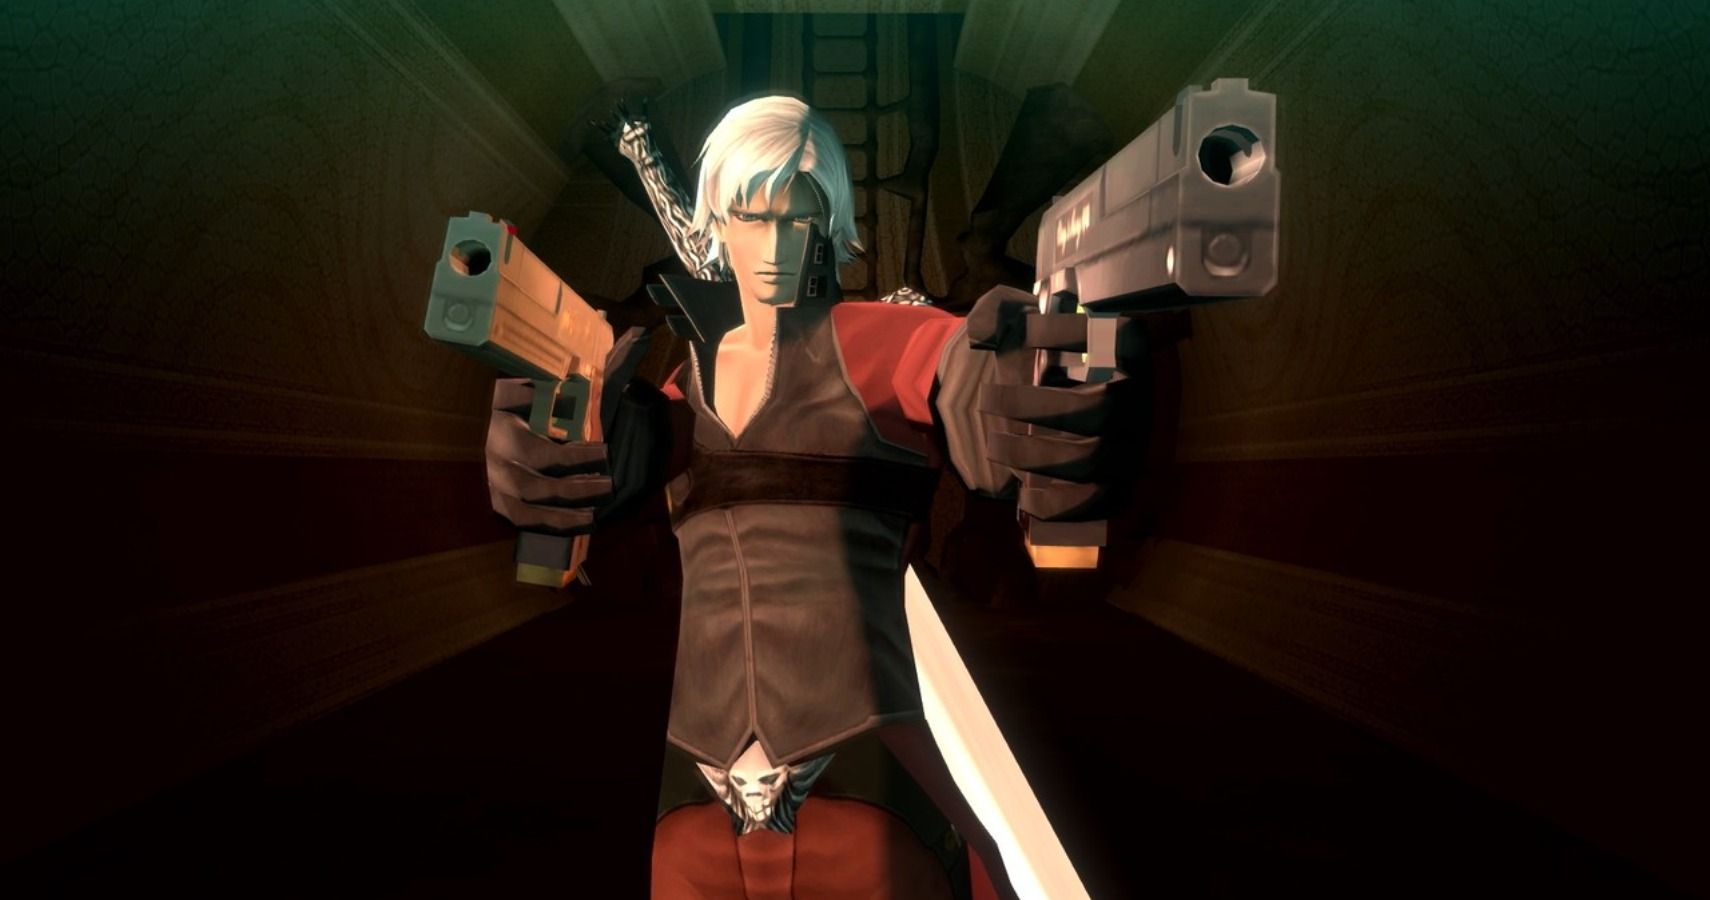 How To Build Dante From Devil May Cry As A Dungeons & Dragons Character